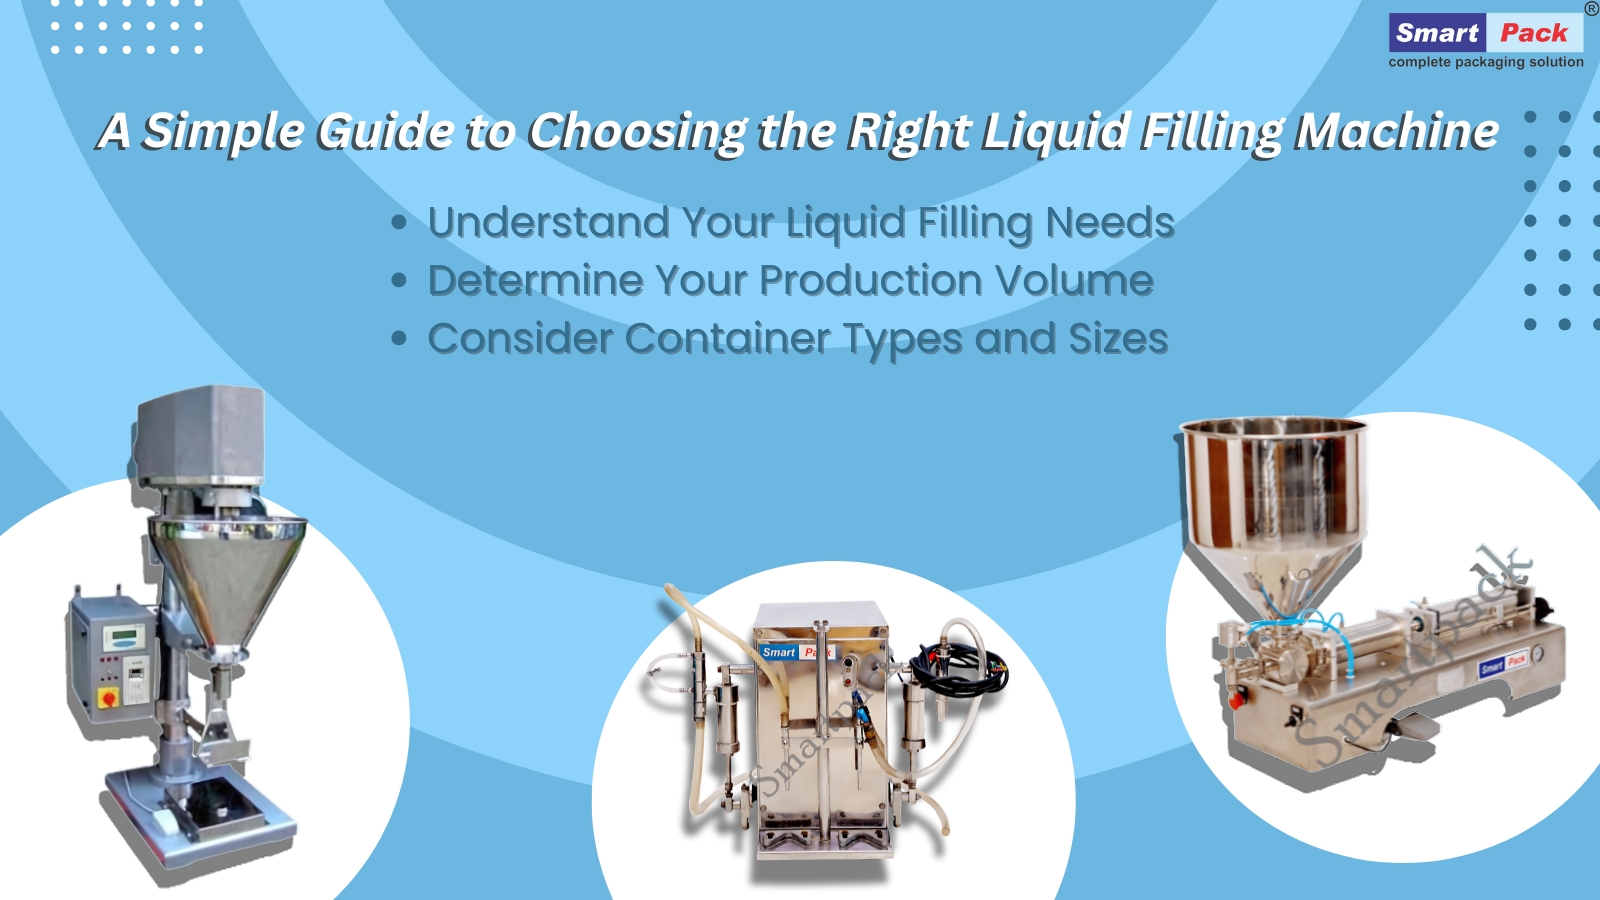 Finding Your Flow: A Simple Guide to Choosing the Right Liquid Filling Machine